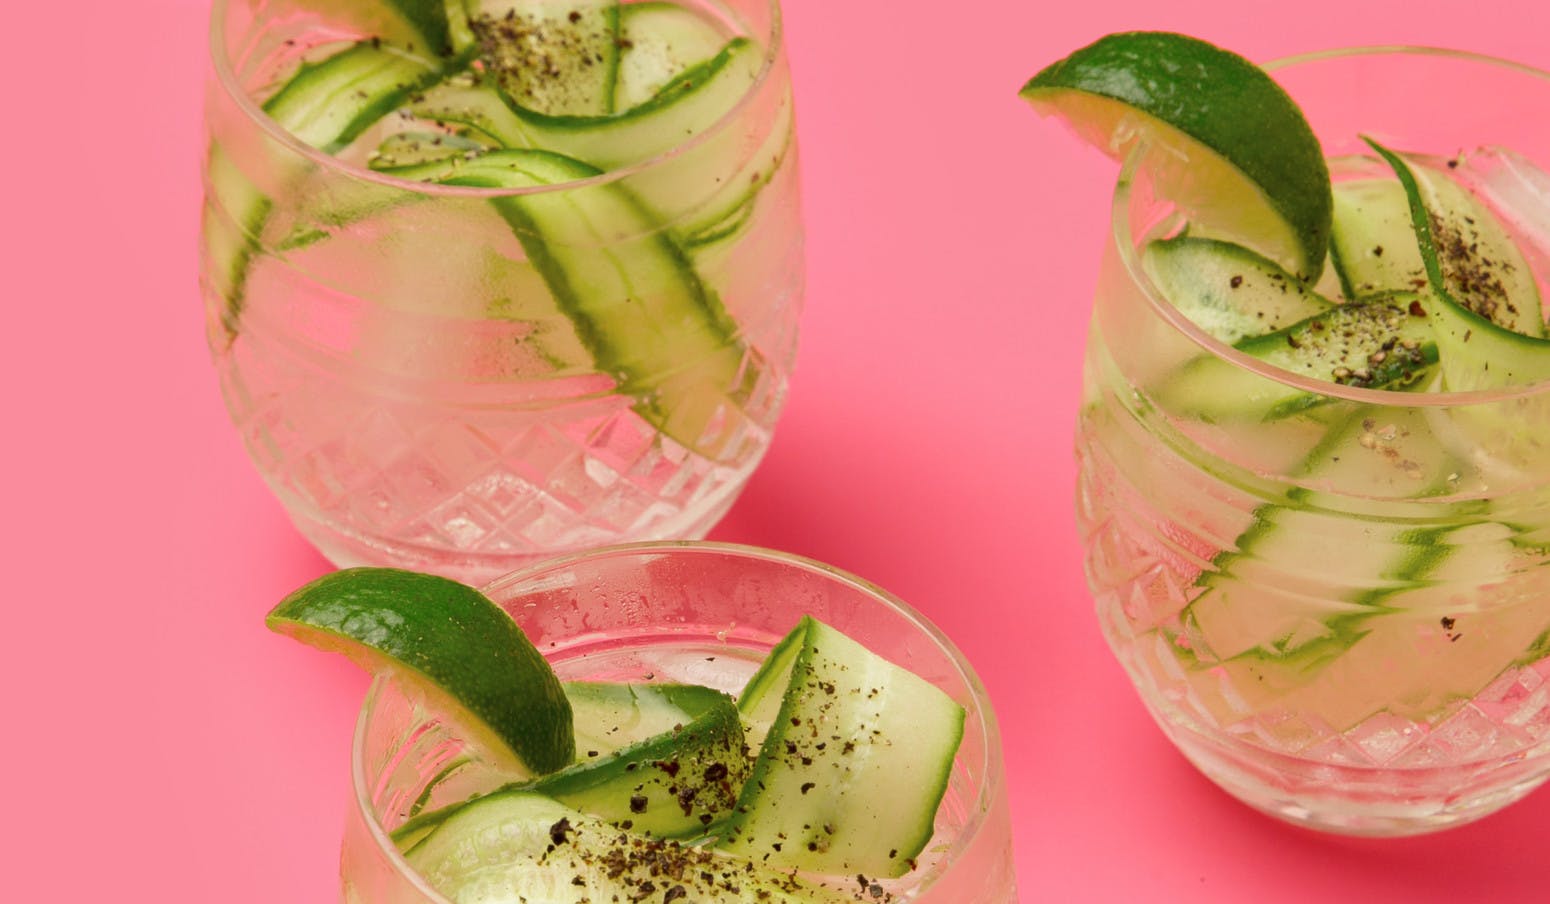 Gin tonic with cucumber and pepper - Summery and refreshing!